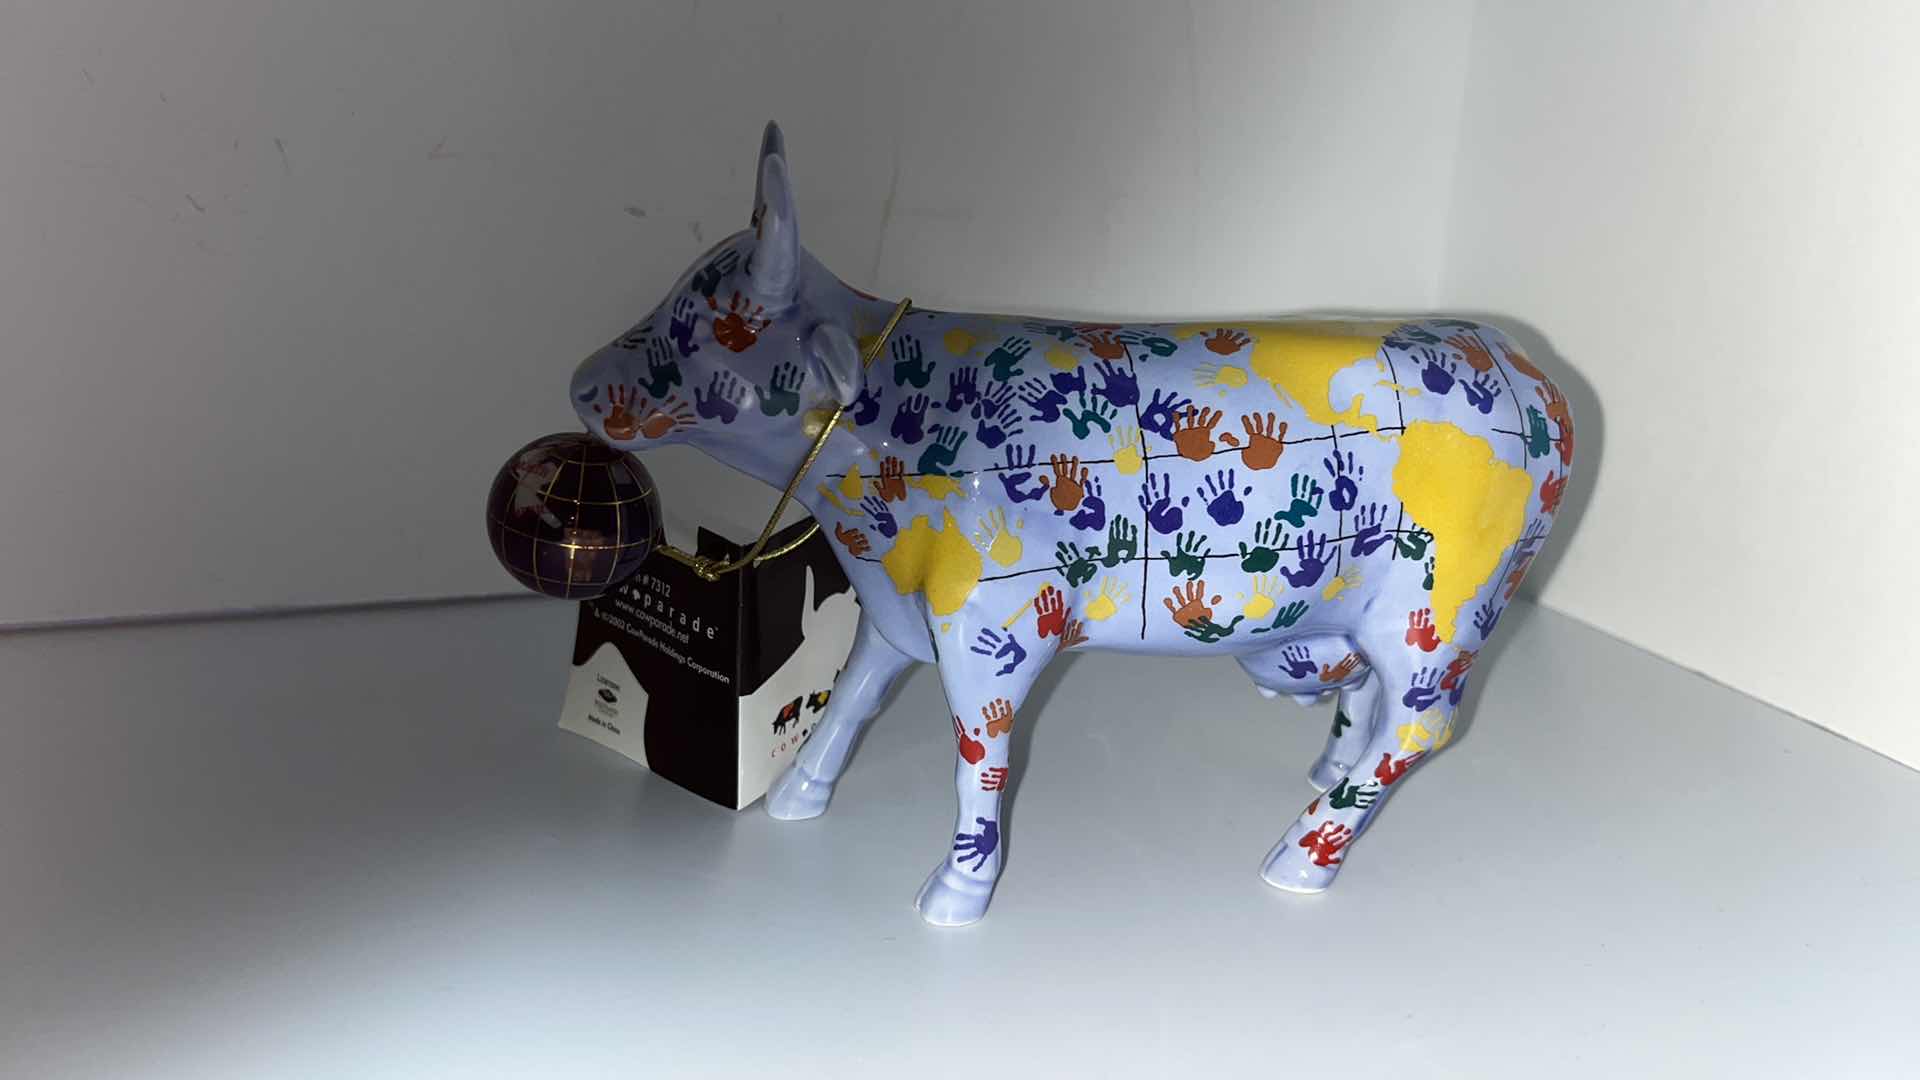 Photo 4 of WESTLAND GIFTWARE COW PARADE IT’S A SMOOLL WORLD FIGURINE 2002 (7312)